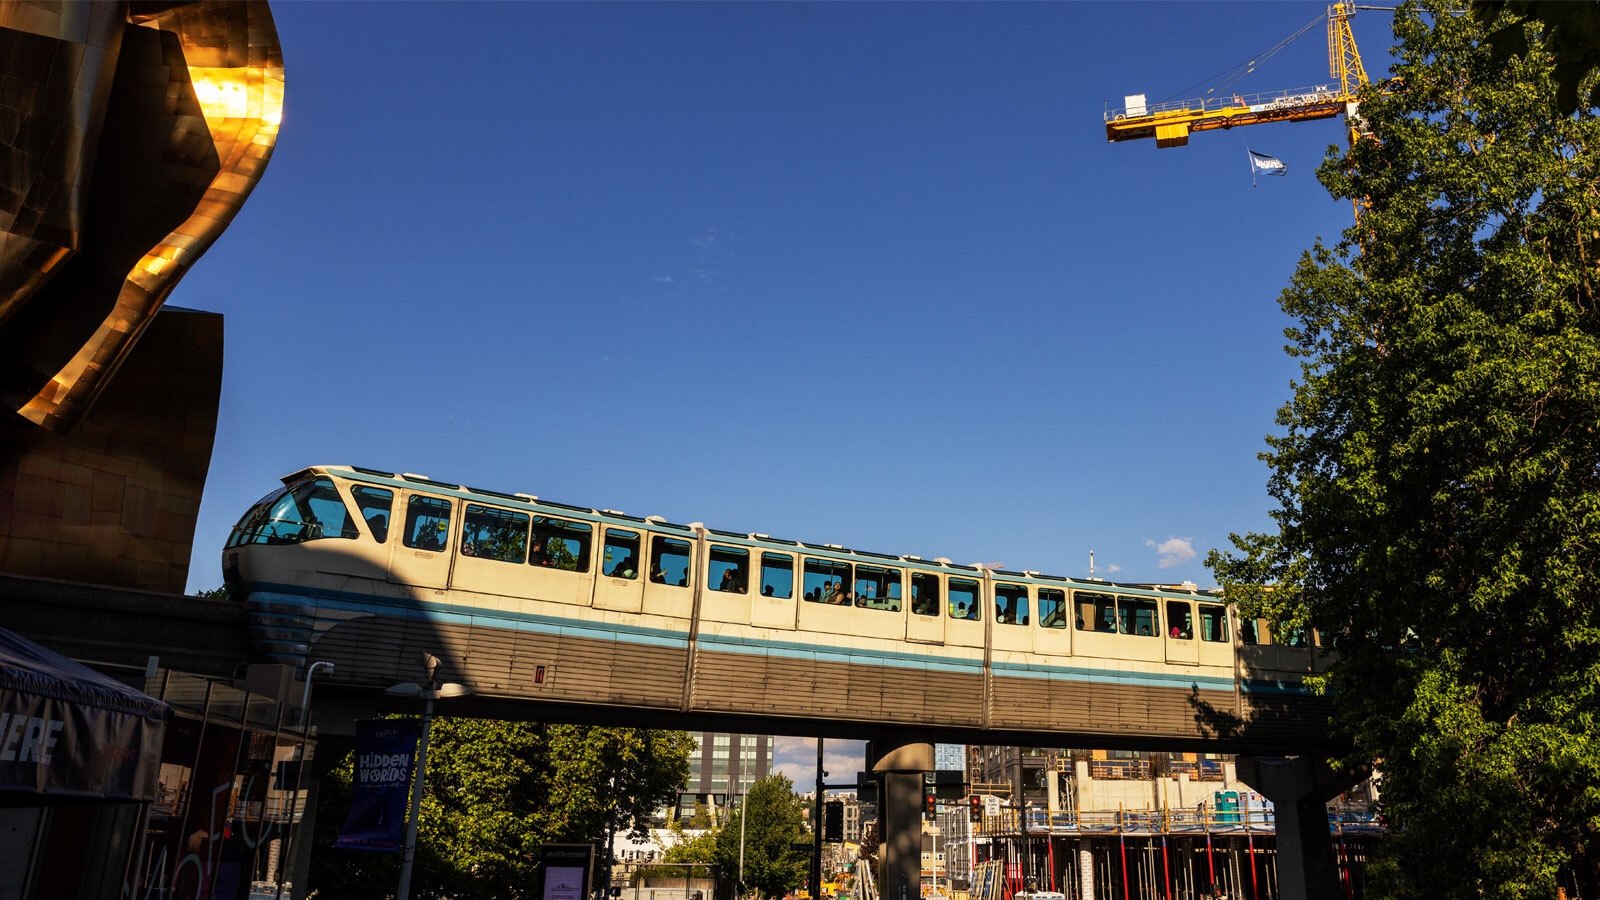 An image of the monorail train outside of Climate Pledge Arena in Seattle.